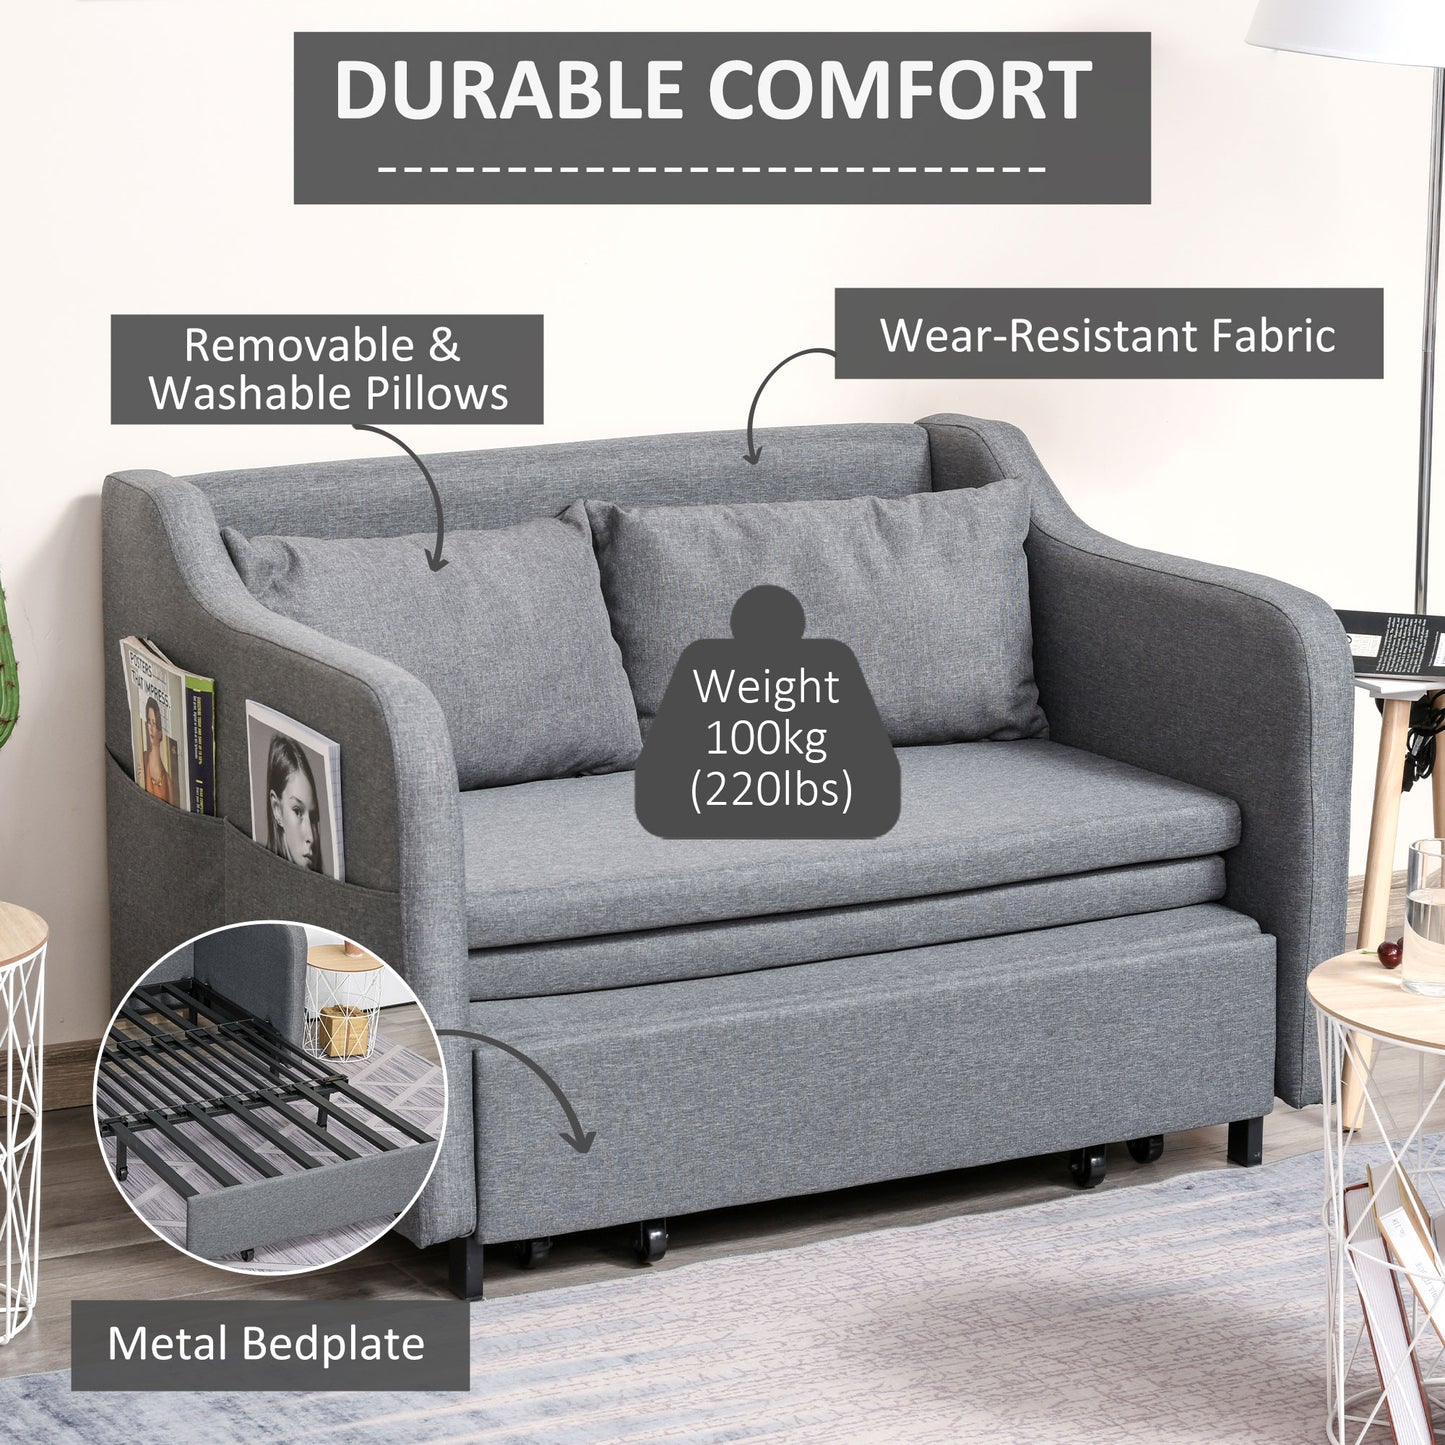 HOMCOM 2 Seater Sofa Bed, Pull Out Sofa Bed with Pillows and Side Pockets, Convertible Sleeper Couch for Living Room, Grey